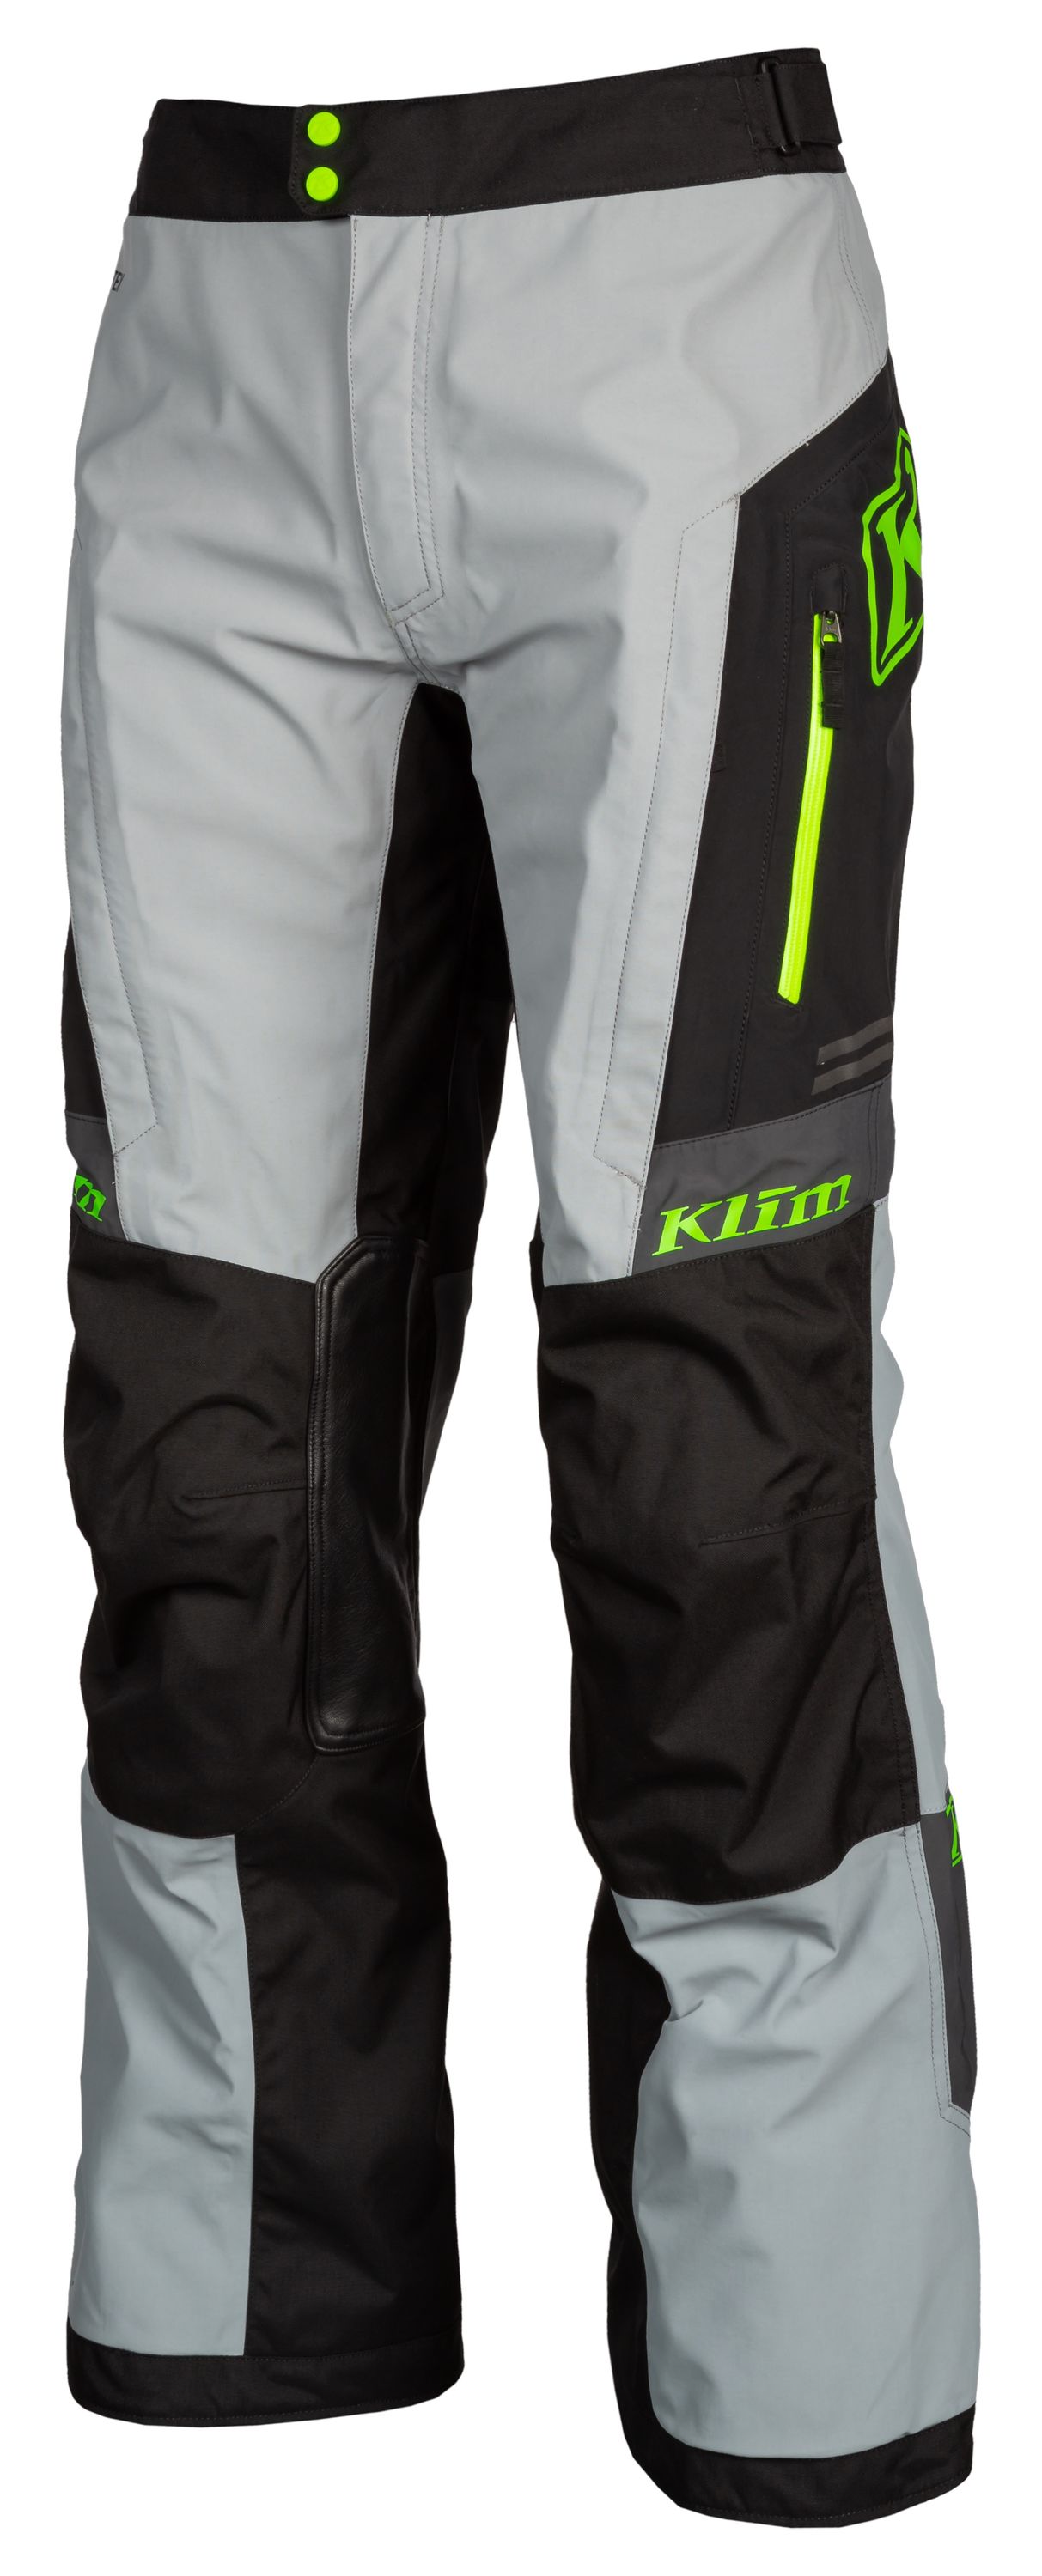 KLIM - Protected for the Unexpected !